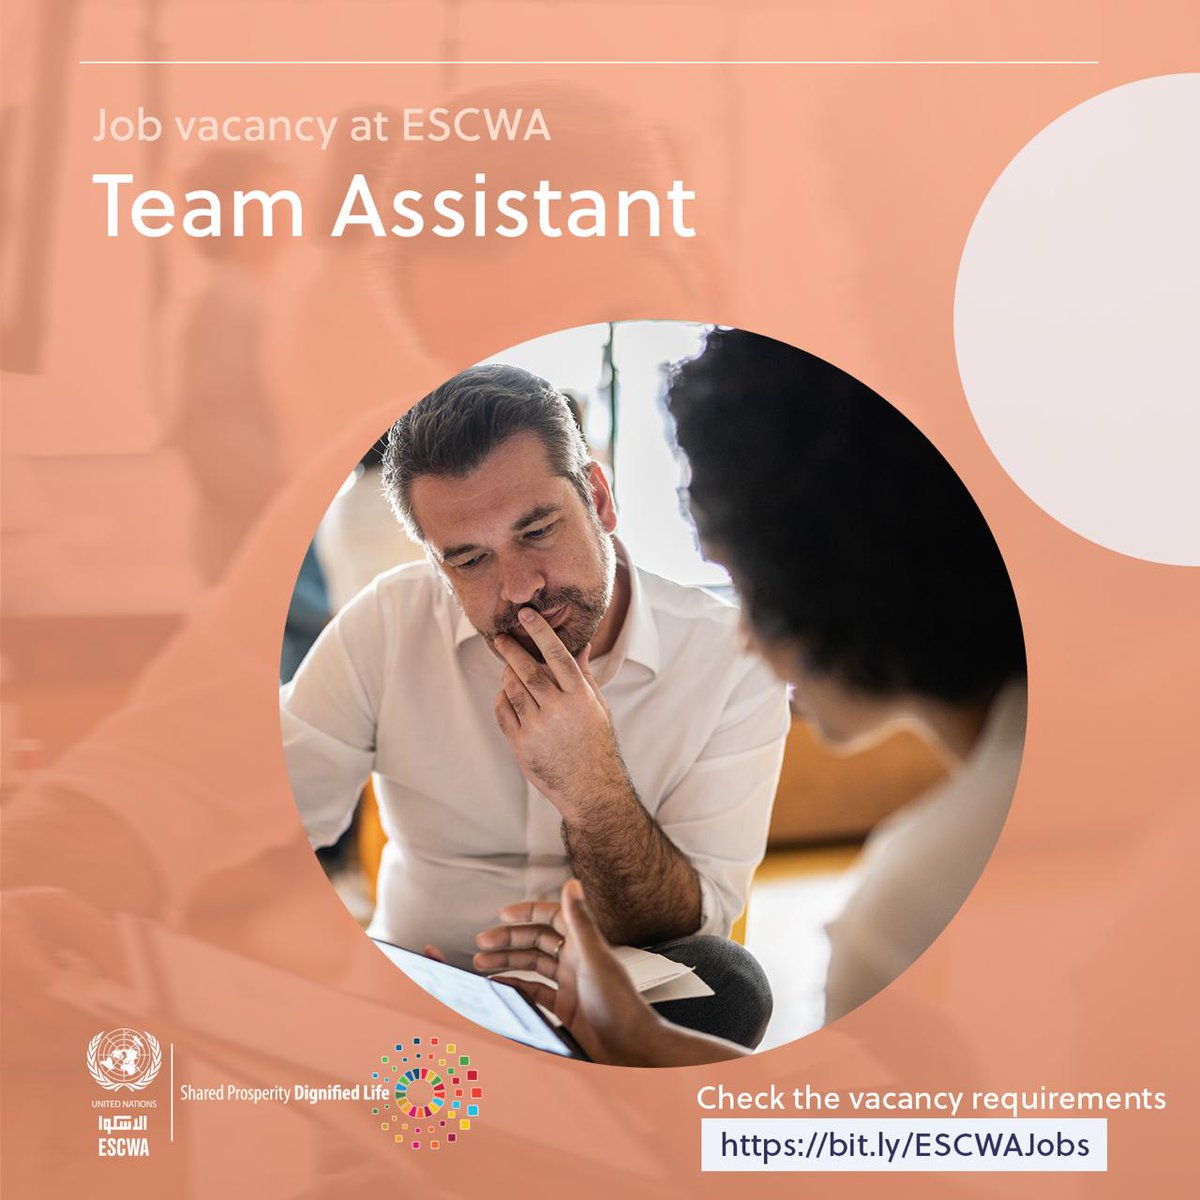 Are you interested in joining #ESCWA?

If you hold a high school diploma and have 3+ years of experience in general office support, apply now for the Team Assistant position 👉 bit.ly/ESCWAJobs.

📆 Deadline: 17 May